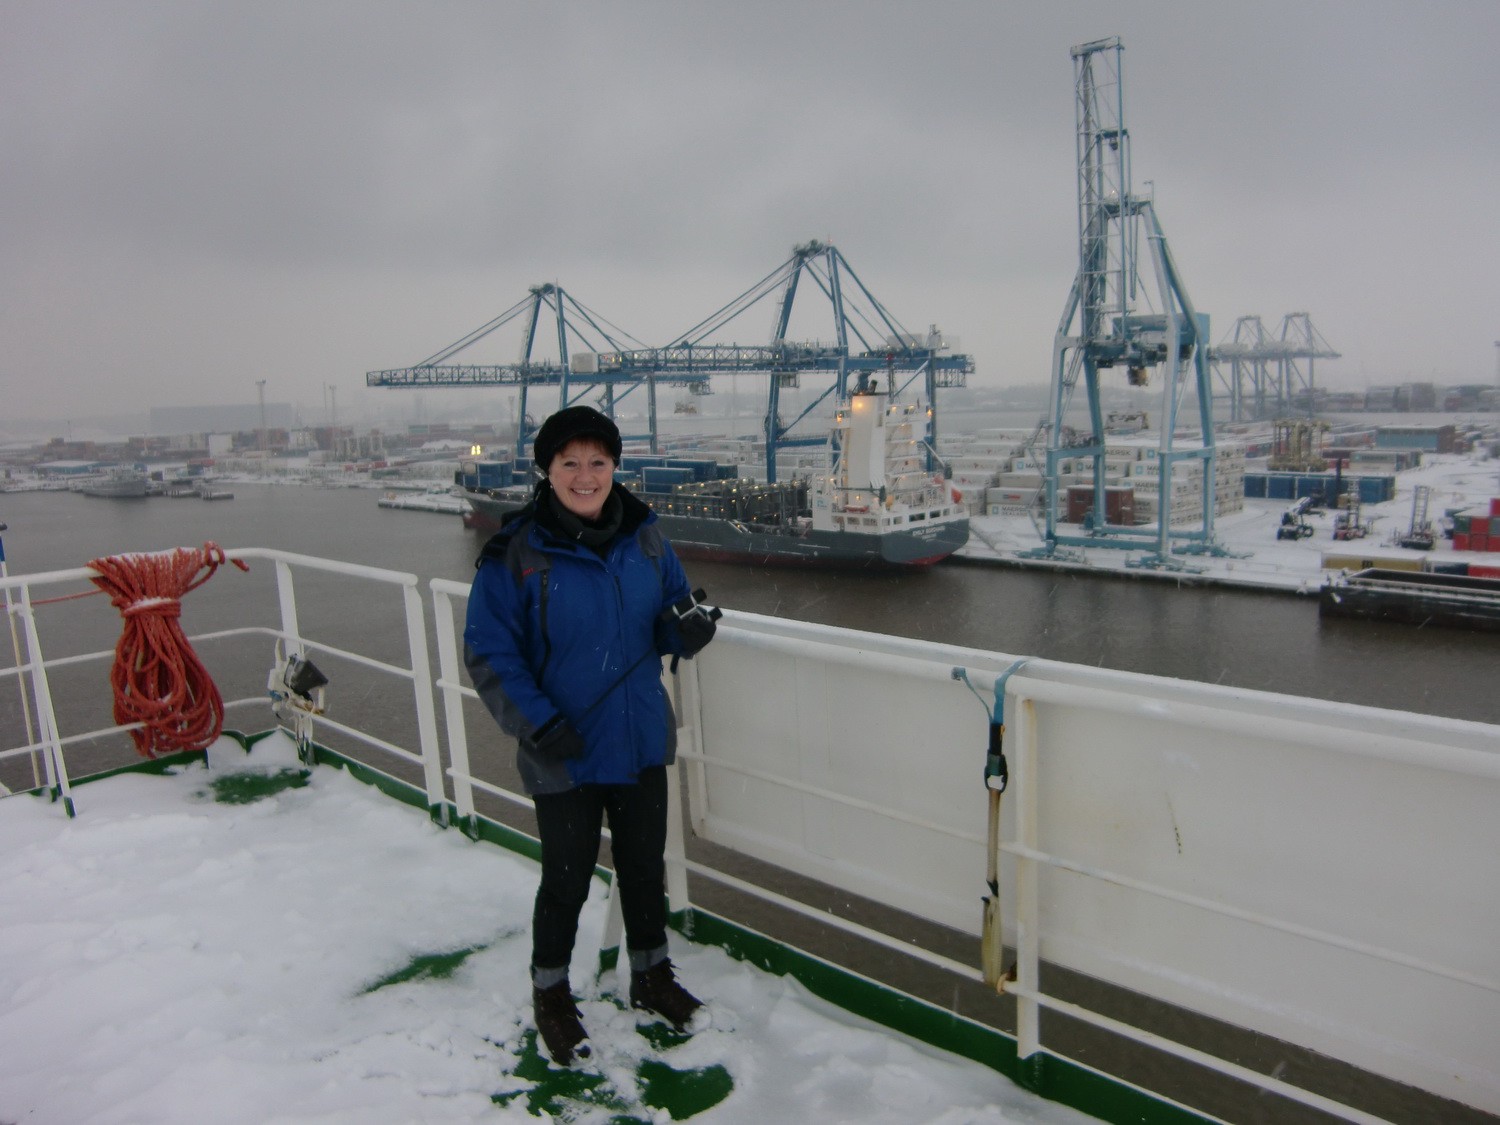 Arrival in Tilbury two days later: Snow in England!